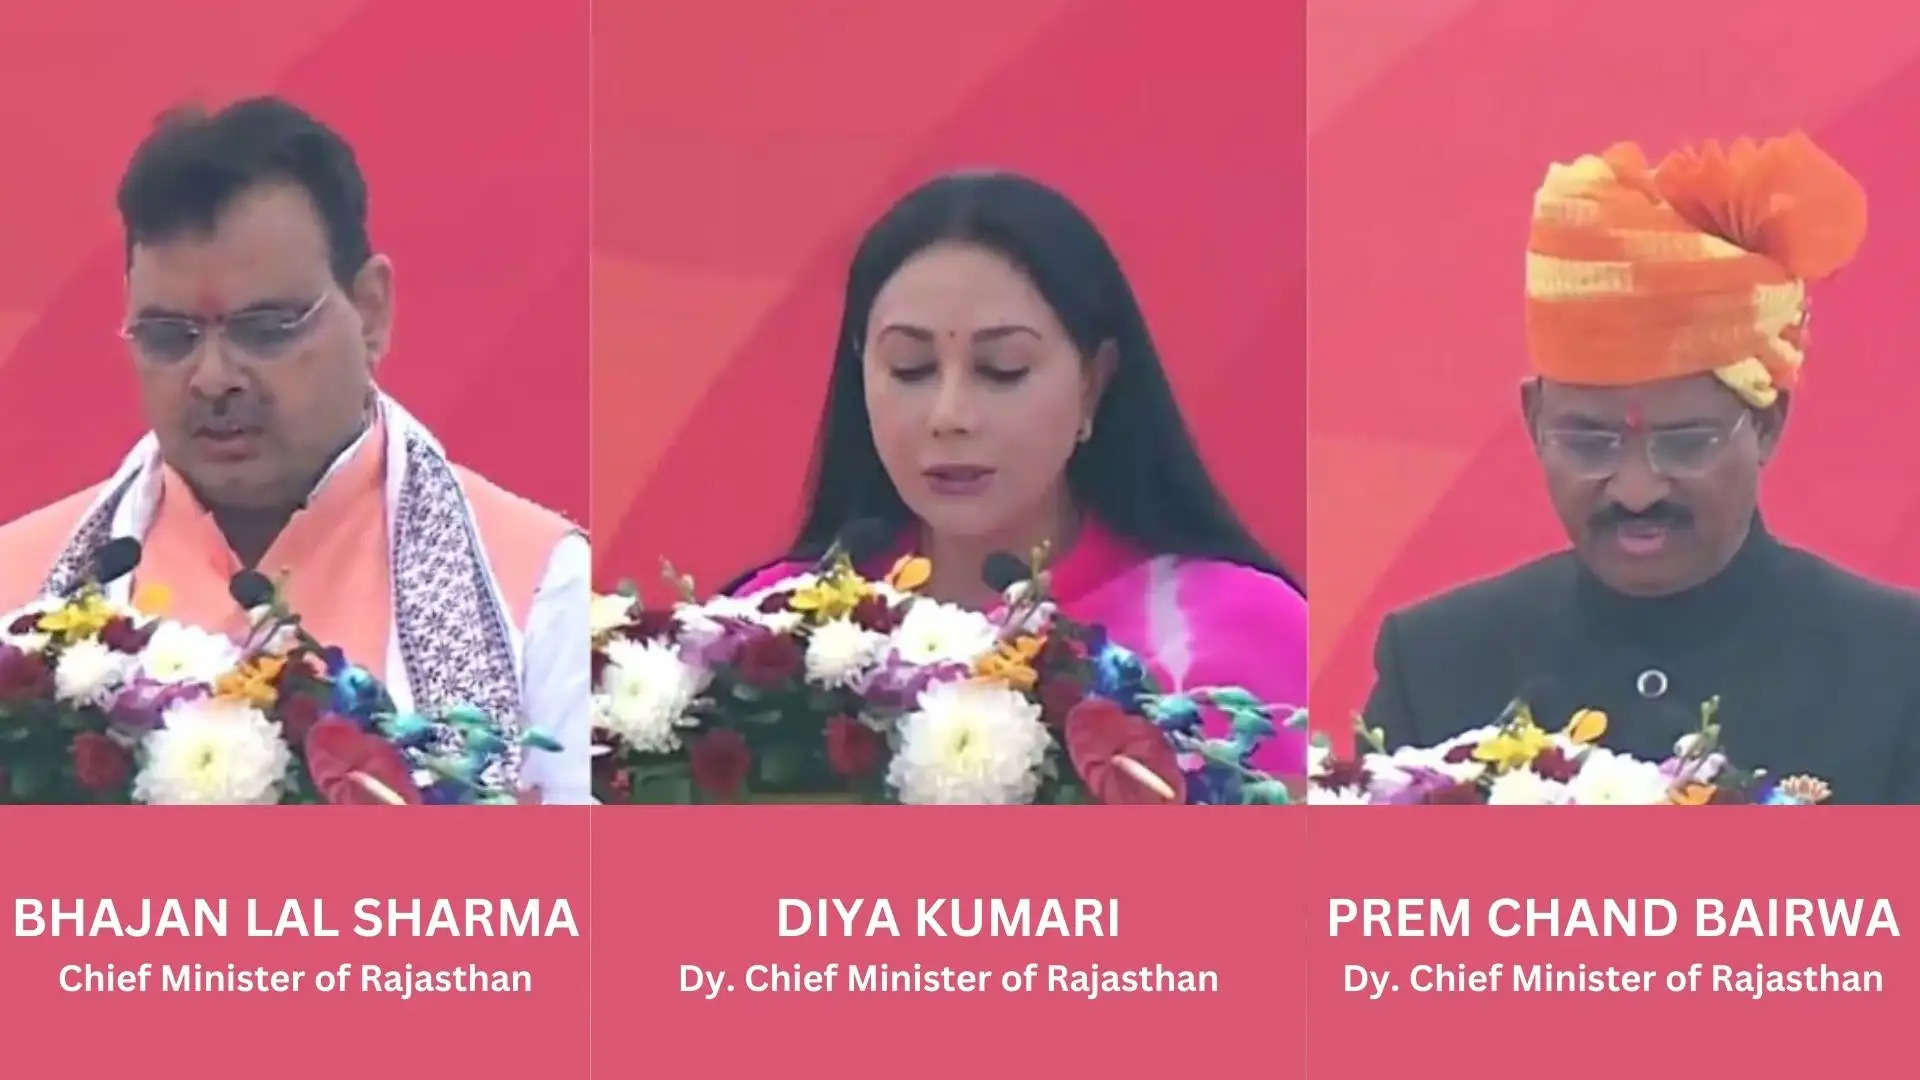 Rajasthan Chief Minister Bhajan Lal Sworn to Office in the pResence of Narendra Modi, Diya Kumari, Dy Chief MInister of Rajasthan  Sworn to Office in the presence of Narendra Modi, Prem Chand Bairwa  Sworn to Office in the presence of Narendra Modi